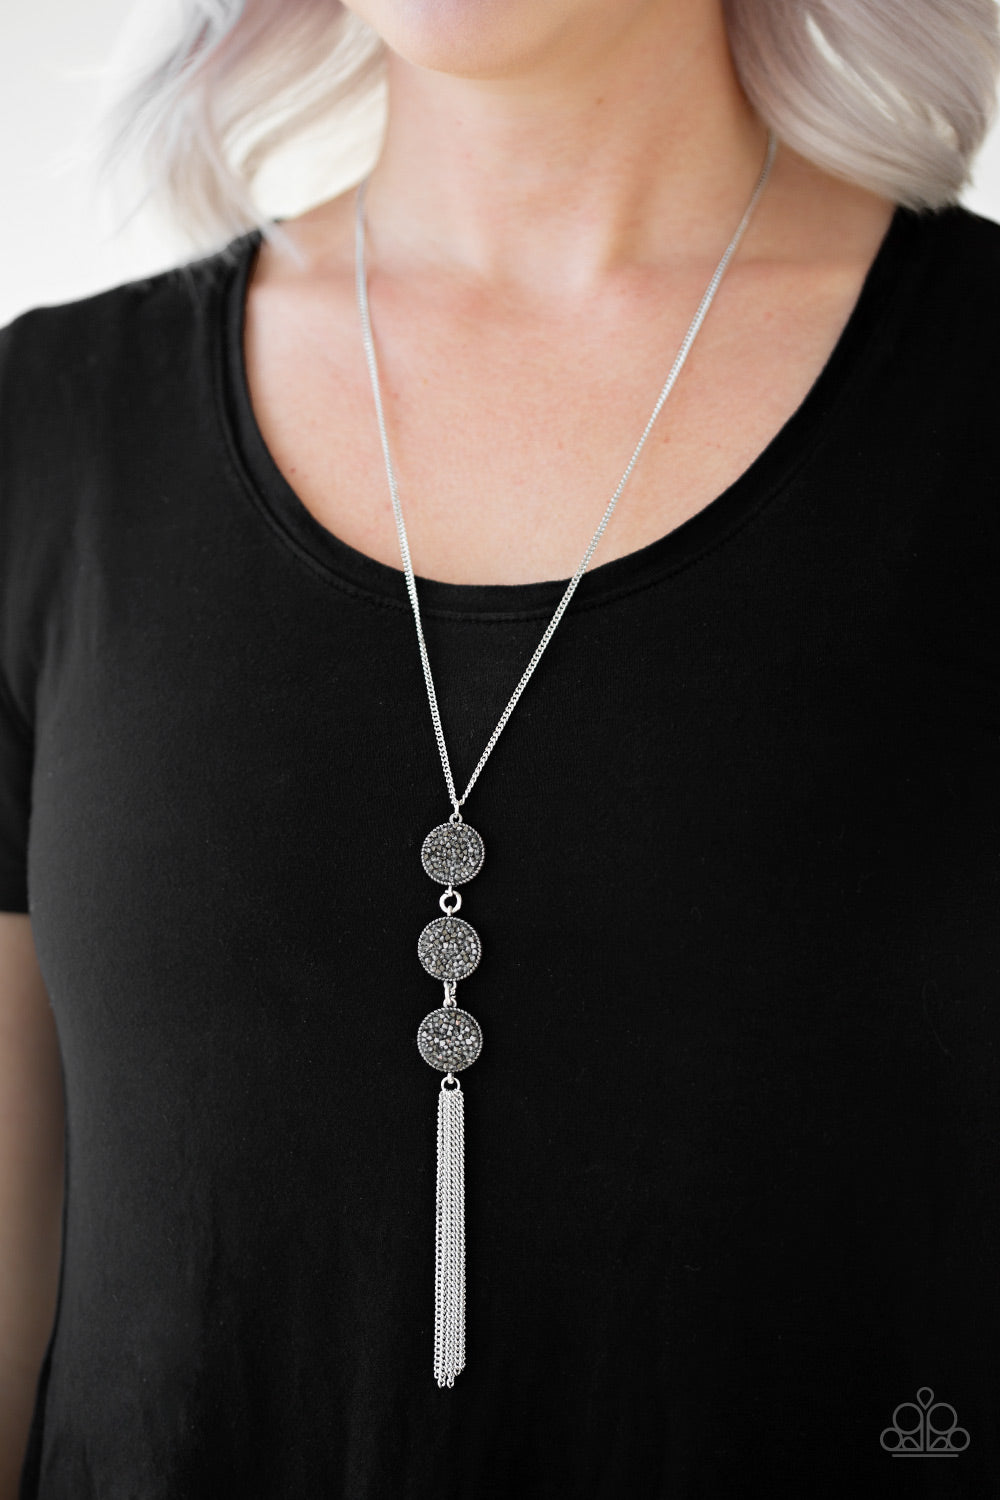 Triple shimmer- Silver/Hematite Necklace And Earrings